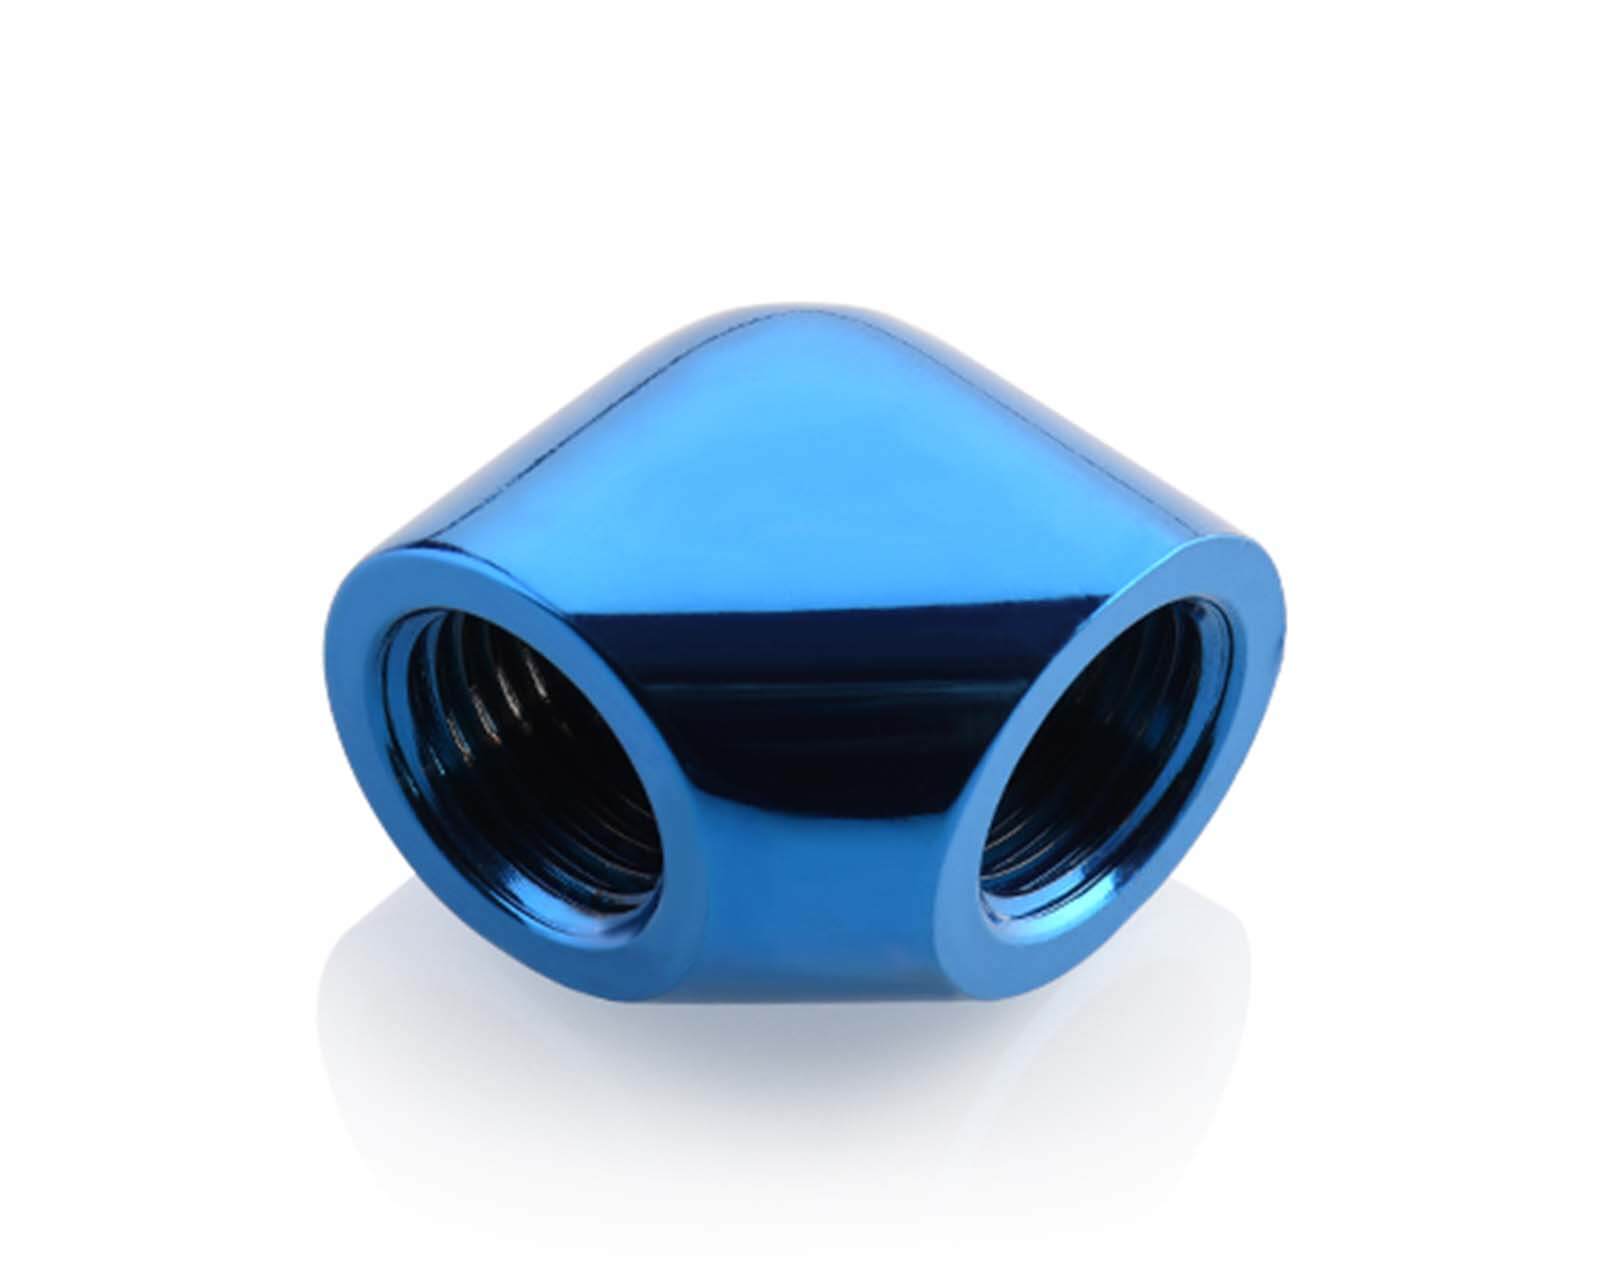 Bykski Female to Female G 1/4in. 90 Degree Extended Elbow Fitting (CC-EW90-V2) - PrimoChill - KEEPING IT COOL Blue